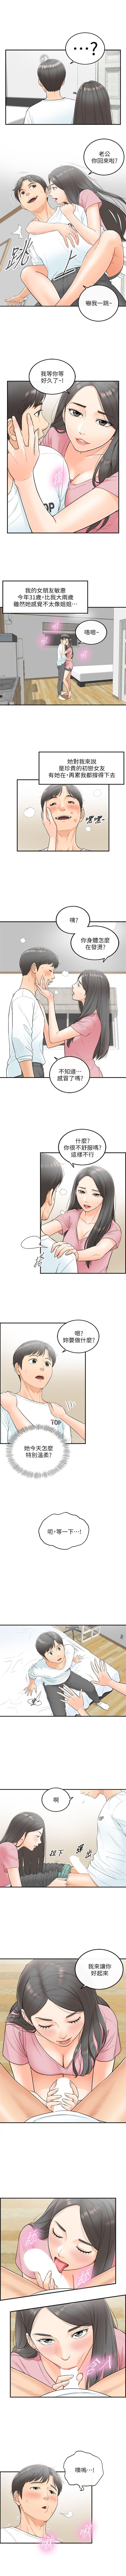 Gay Uncut 正妹小主管 1-53 官方中文（連載中） Free Amature - Page 5